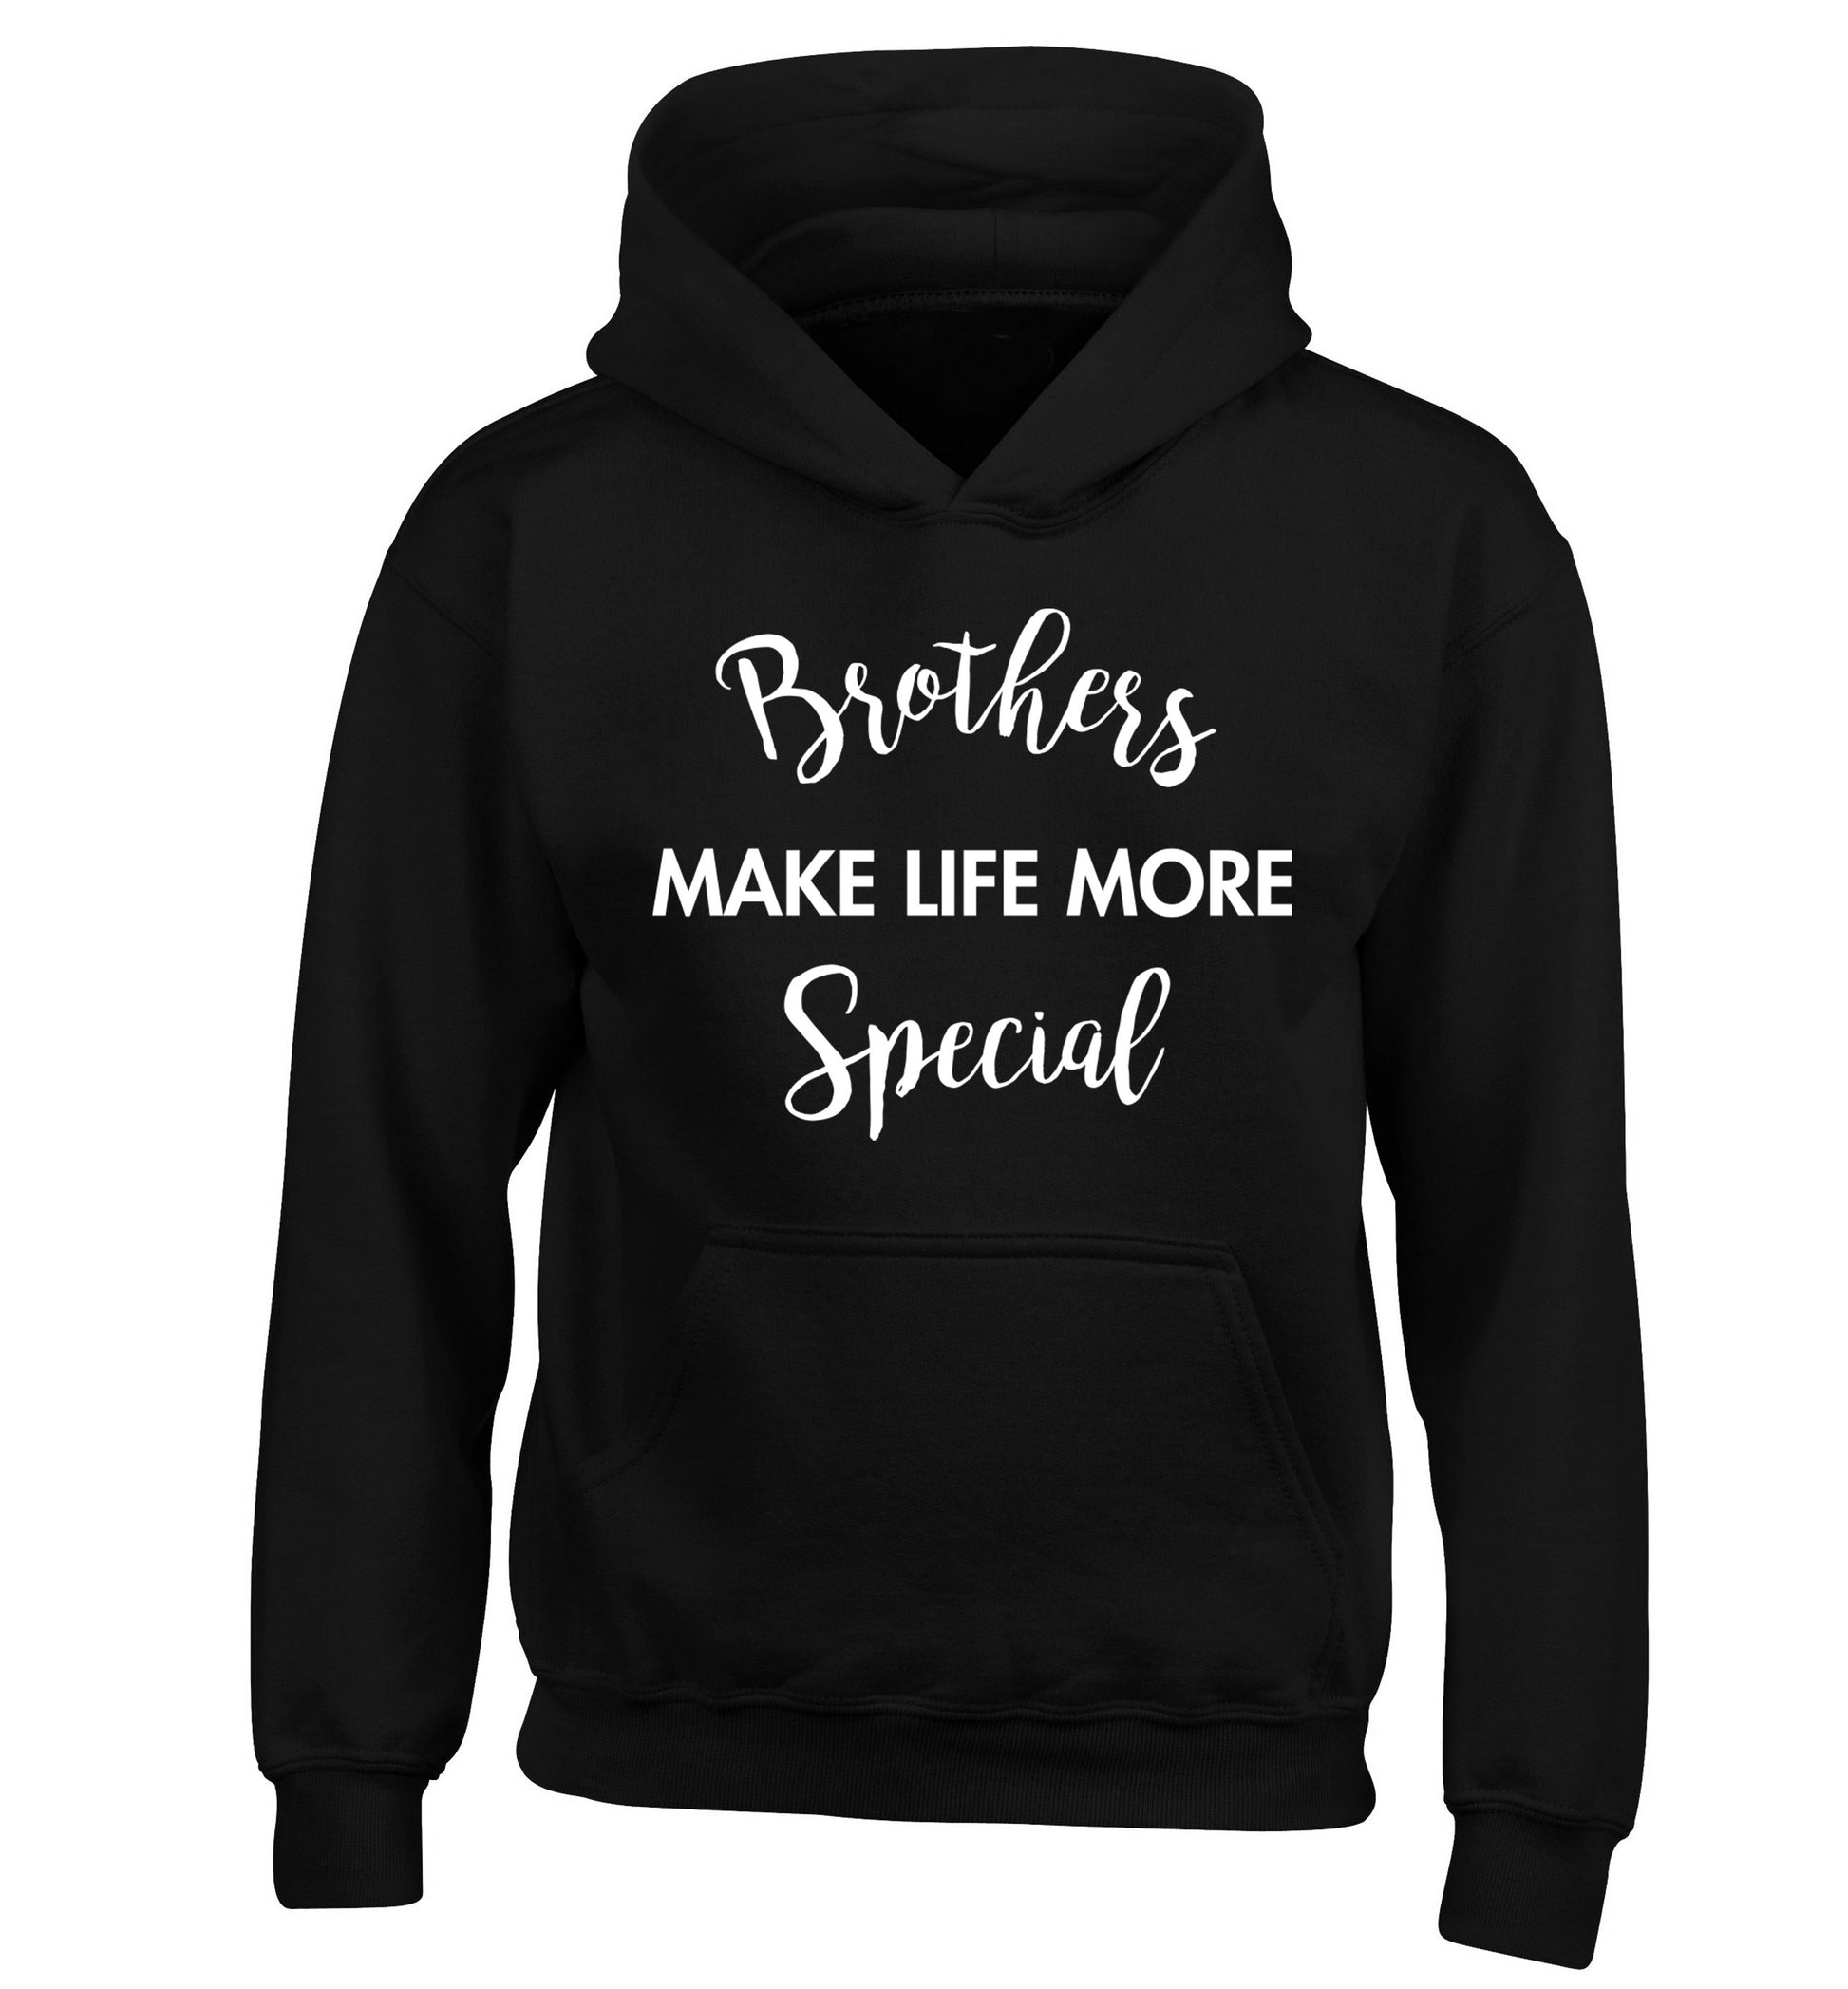 Brothers make life more special children's black hoodie 12-14 Years